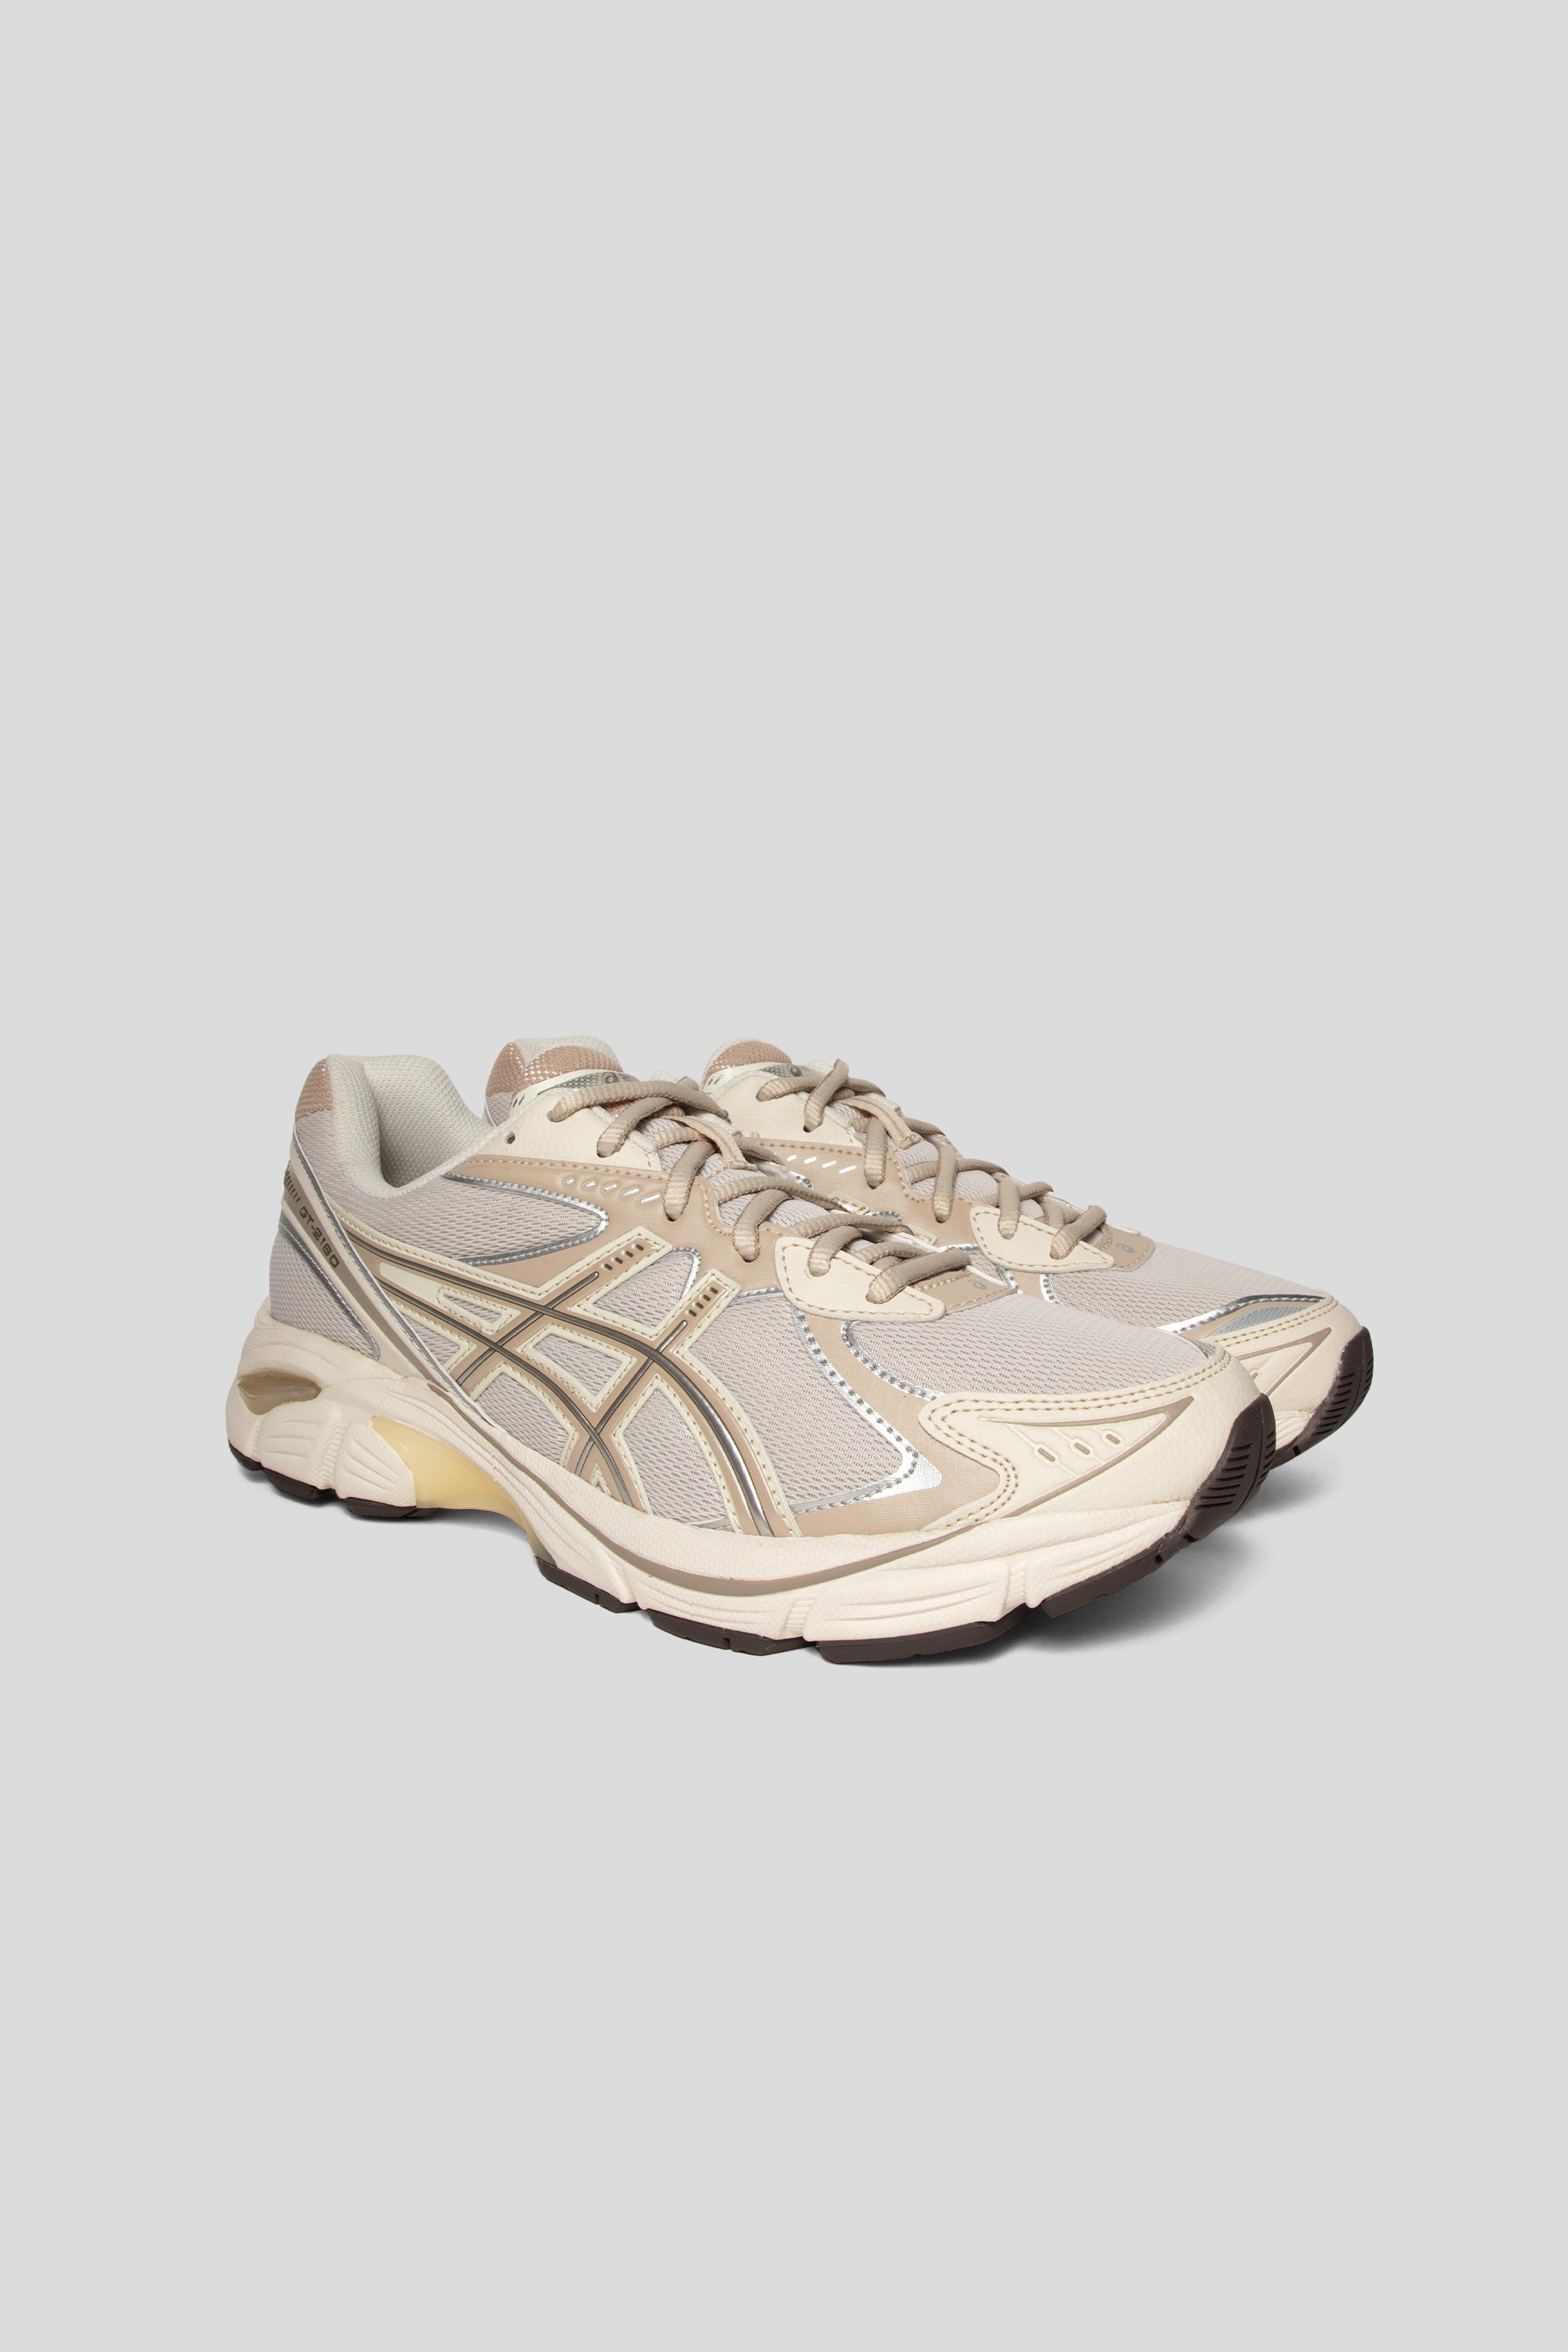 Asics GT-2160 - Oatmeal/Simply Taupe | Wallace Mercantile Shop